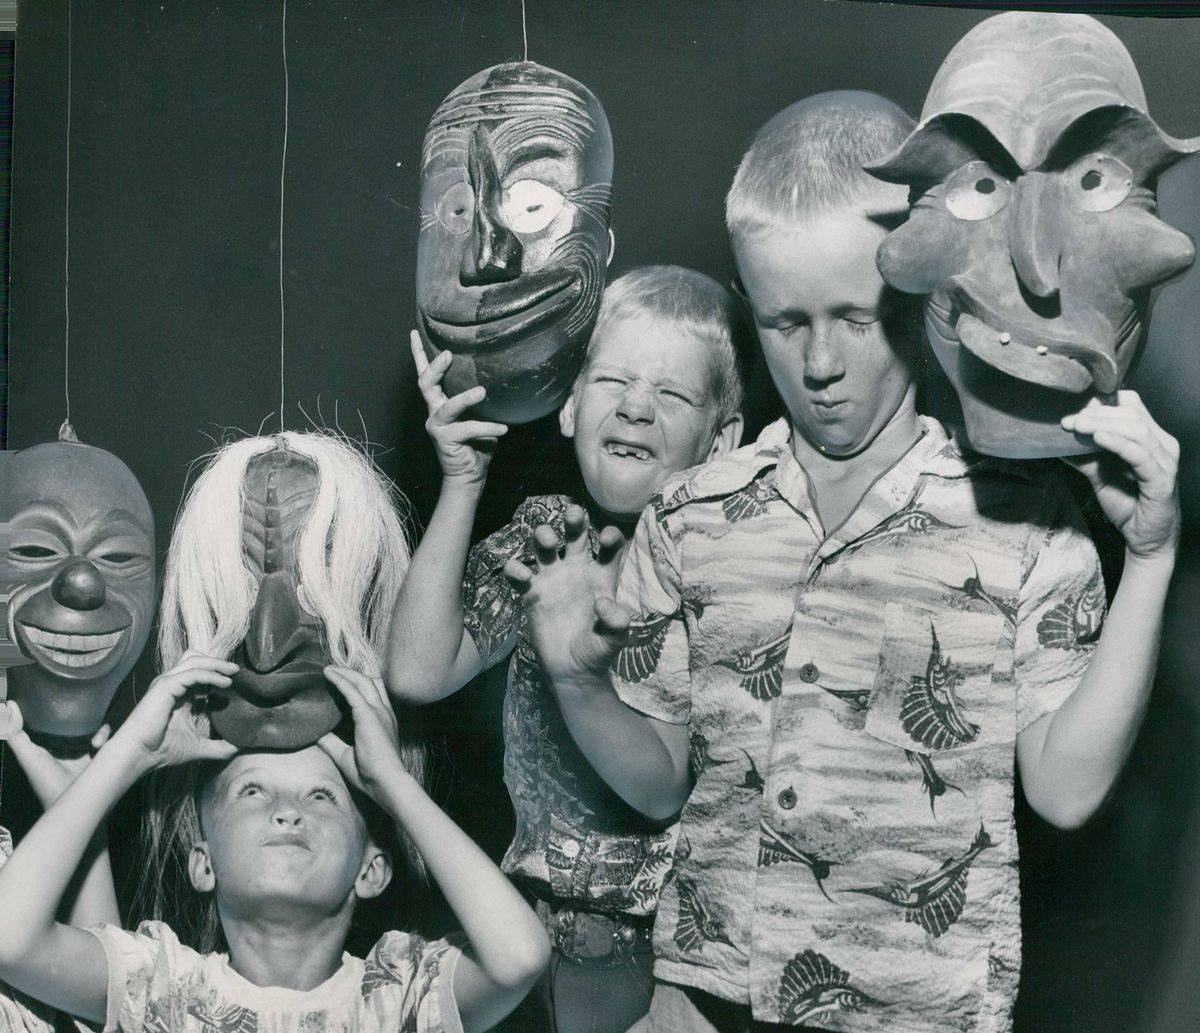 A photo from 1952 of children trying to emulate the faces of the masks they're holding on Halloween